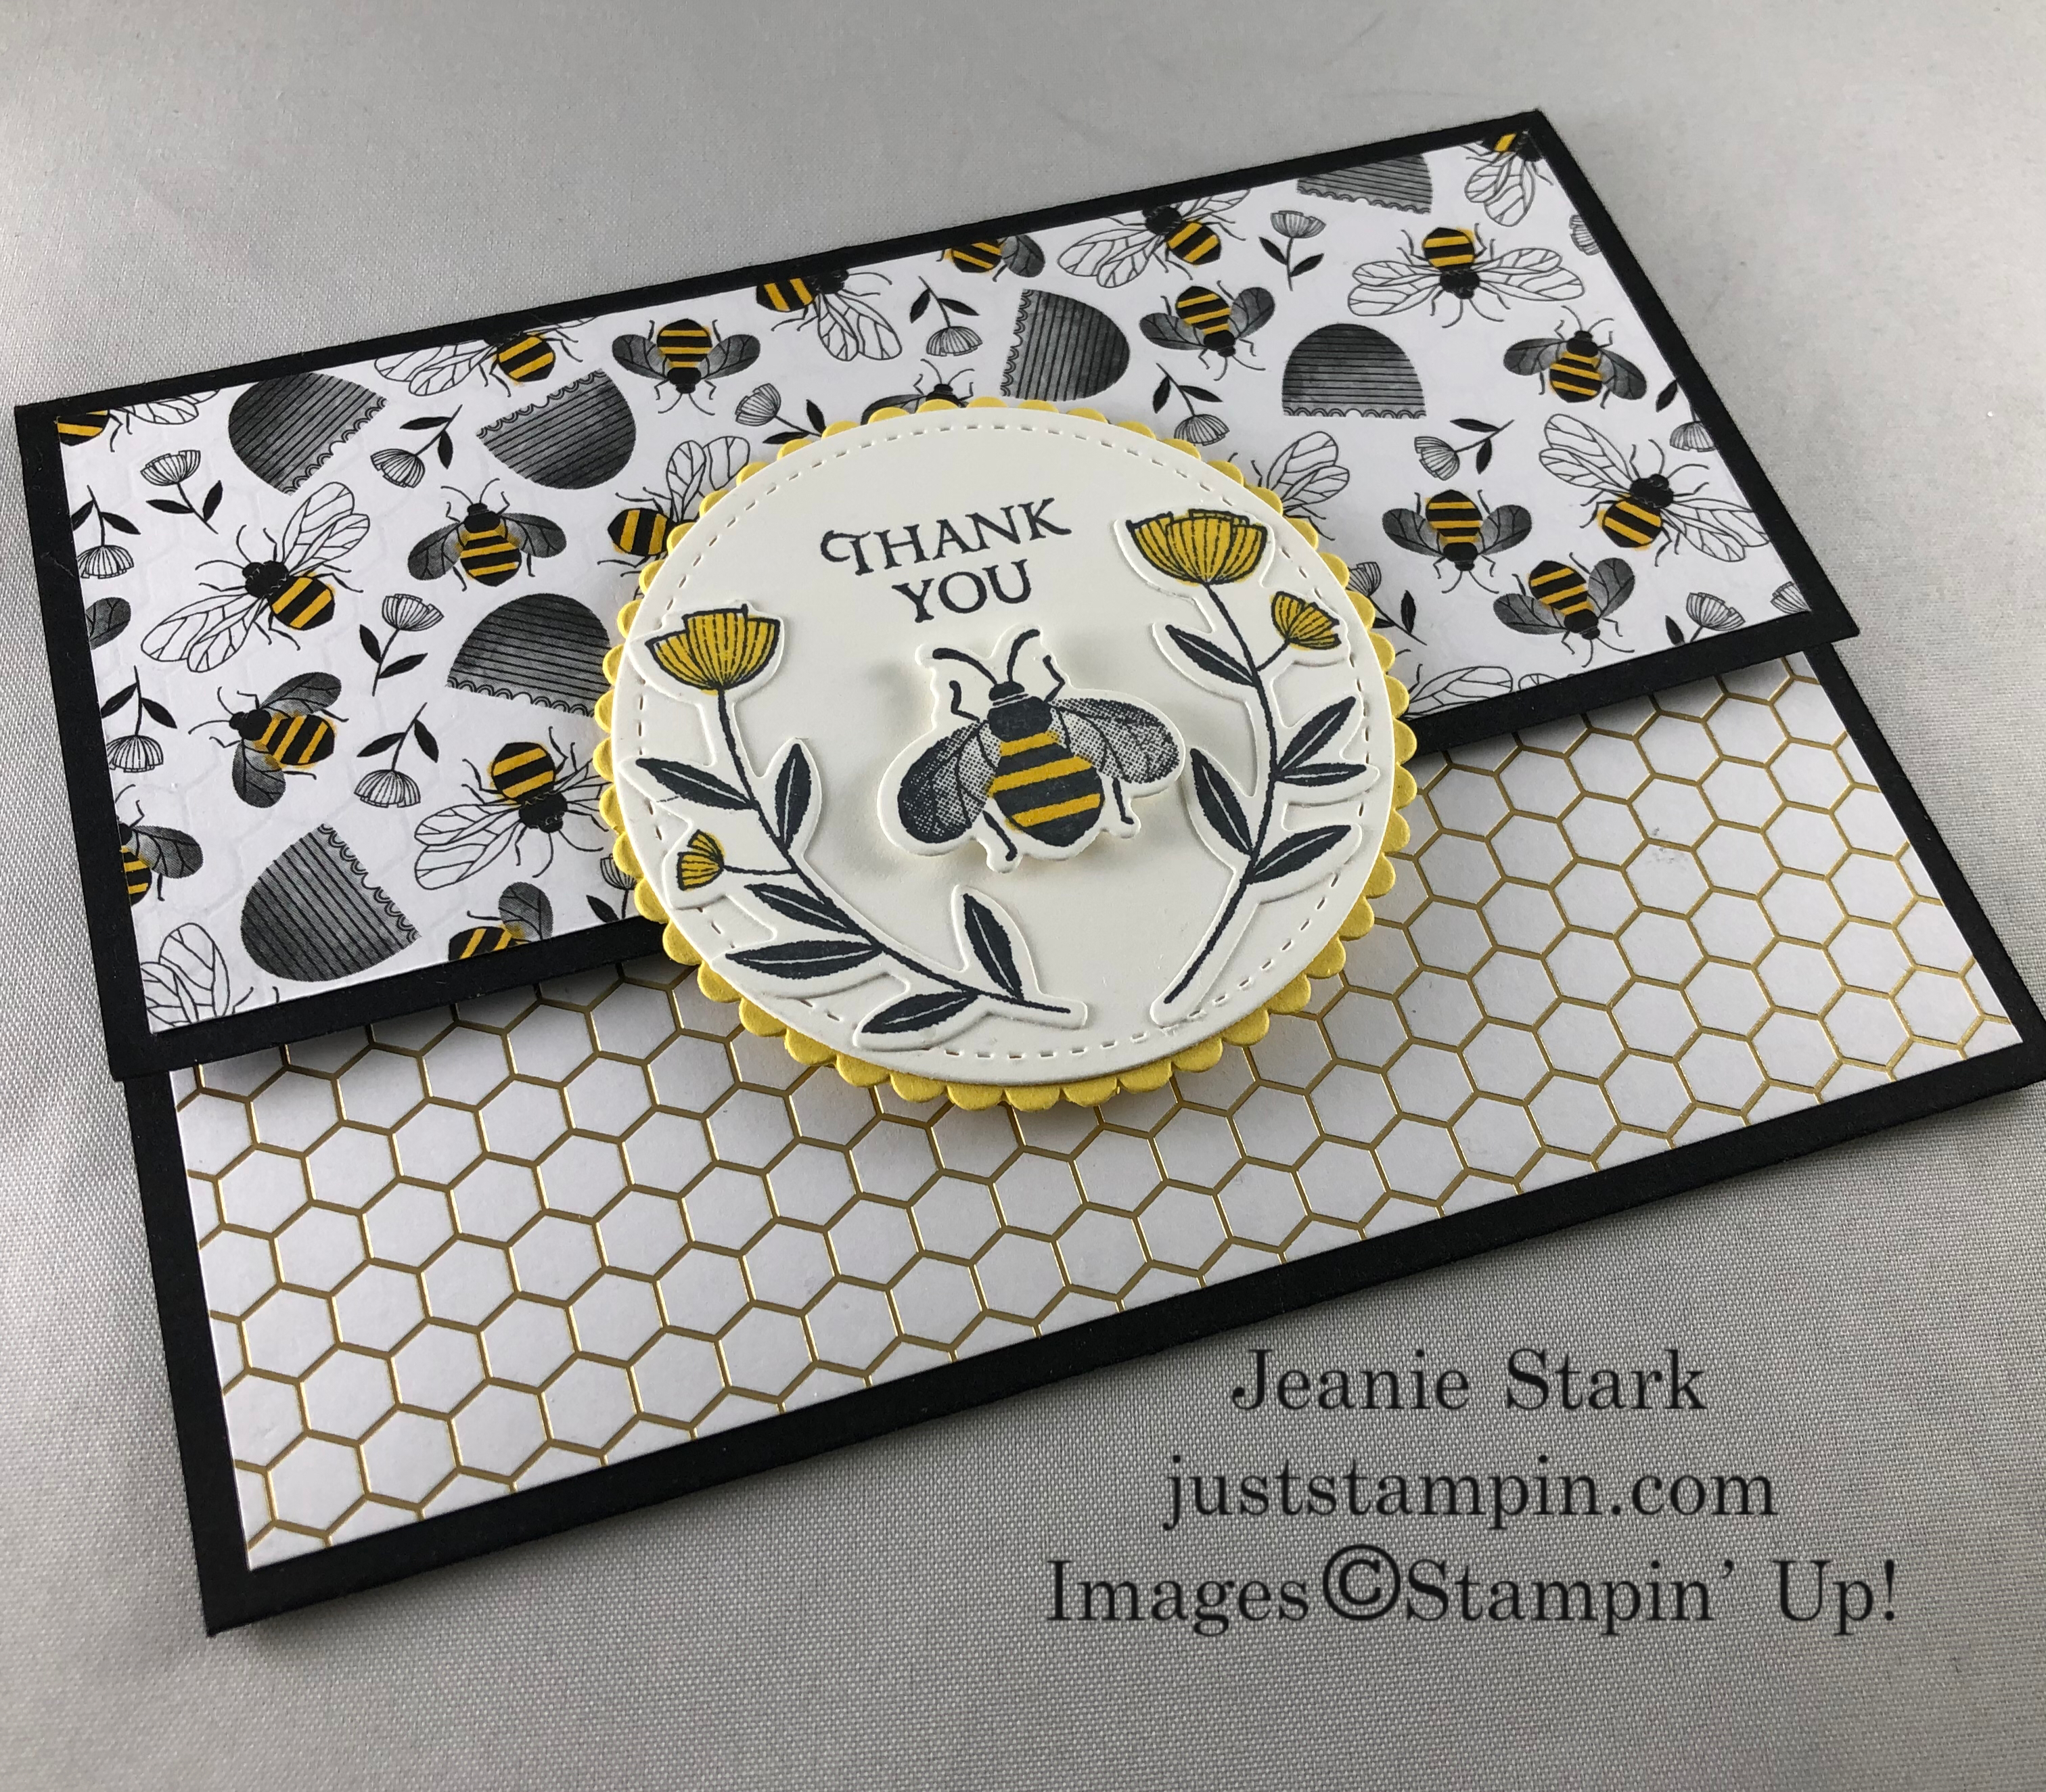 Stampin' Up! Honey Bee fun fold Thank You card idea - Jeanie Stark StampinUp